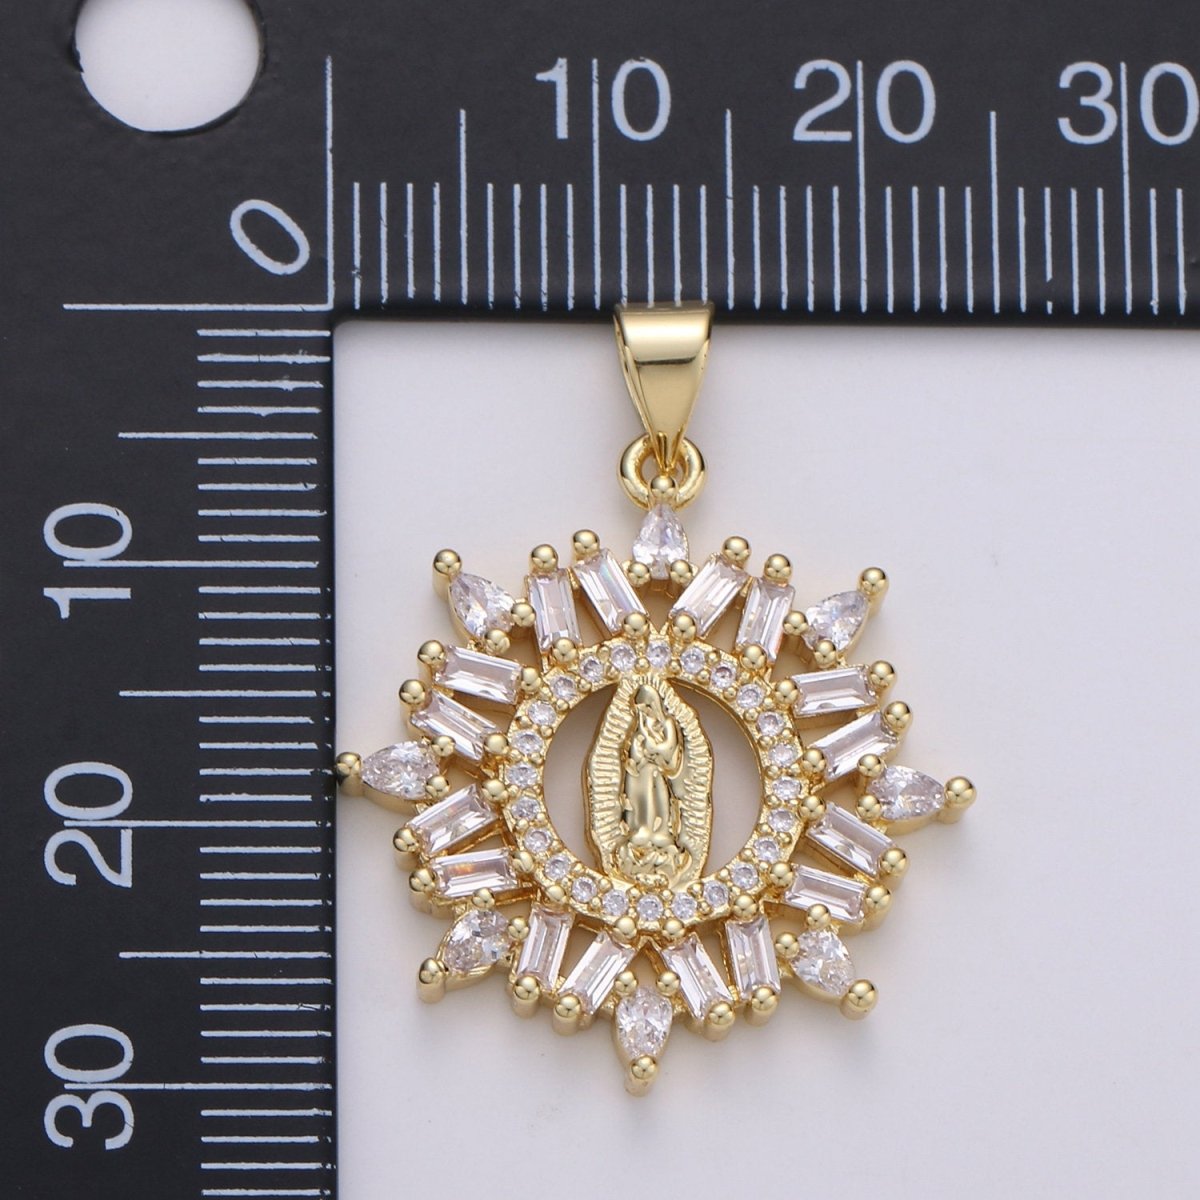 14K Gold Filled Virgin Mary Pendant, Cluster CZ Pendant Craft Supplies For Necklace Bracelet Jewelry Making Micro Pave Baguette Charm I-698 - DLUXCA